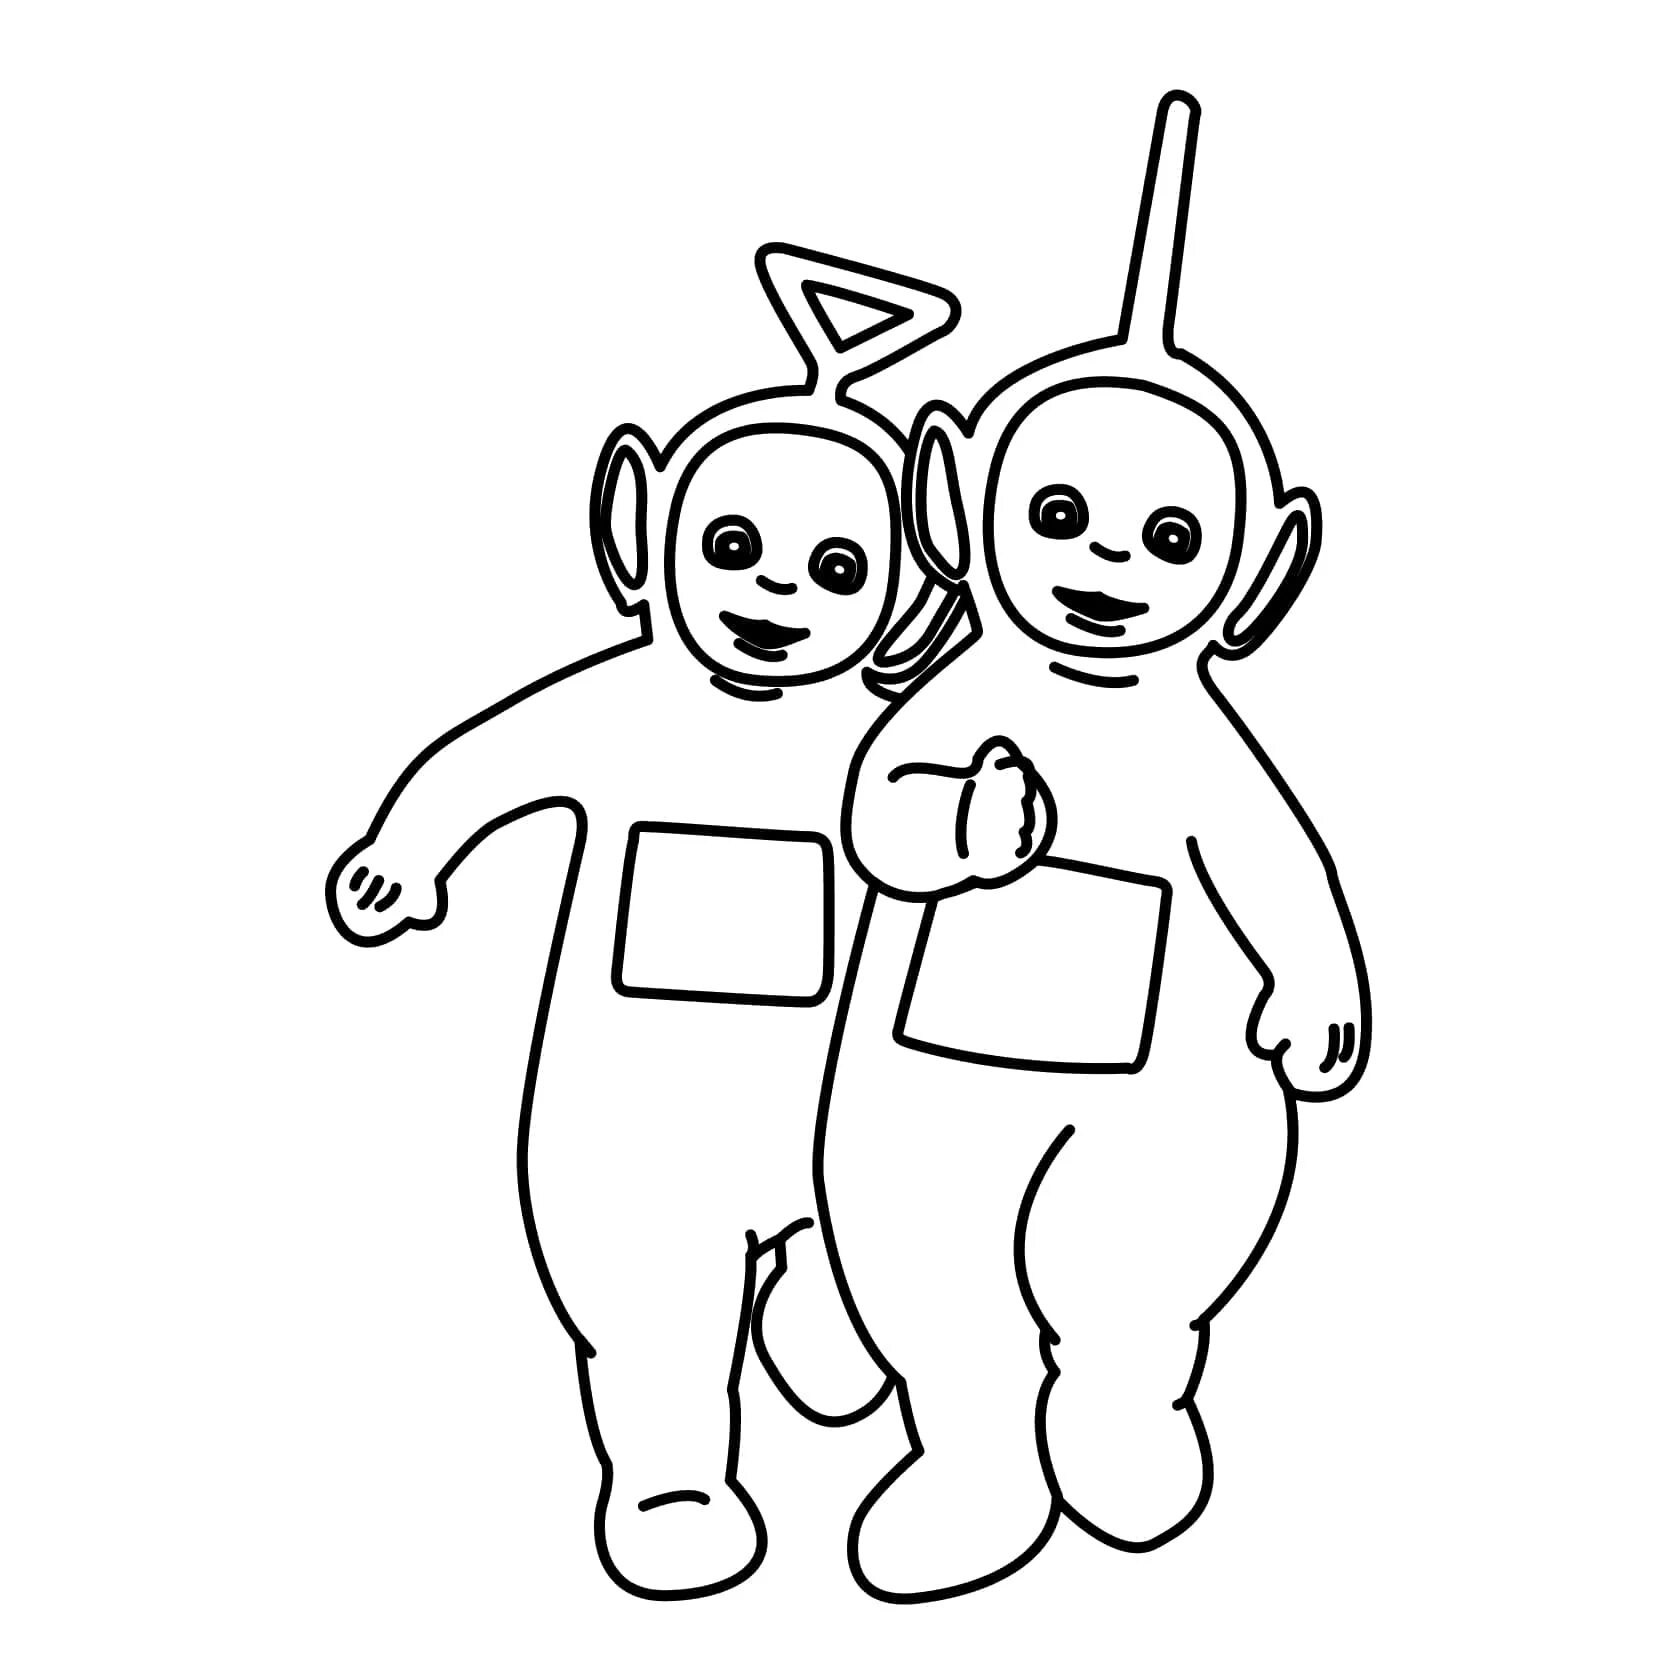 Colored teletubbies coloring book